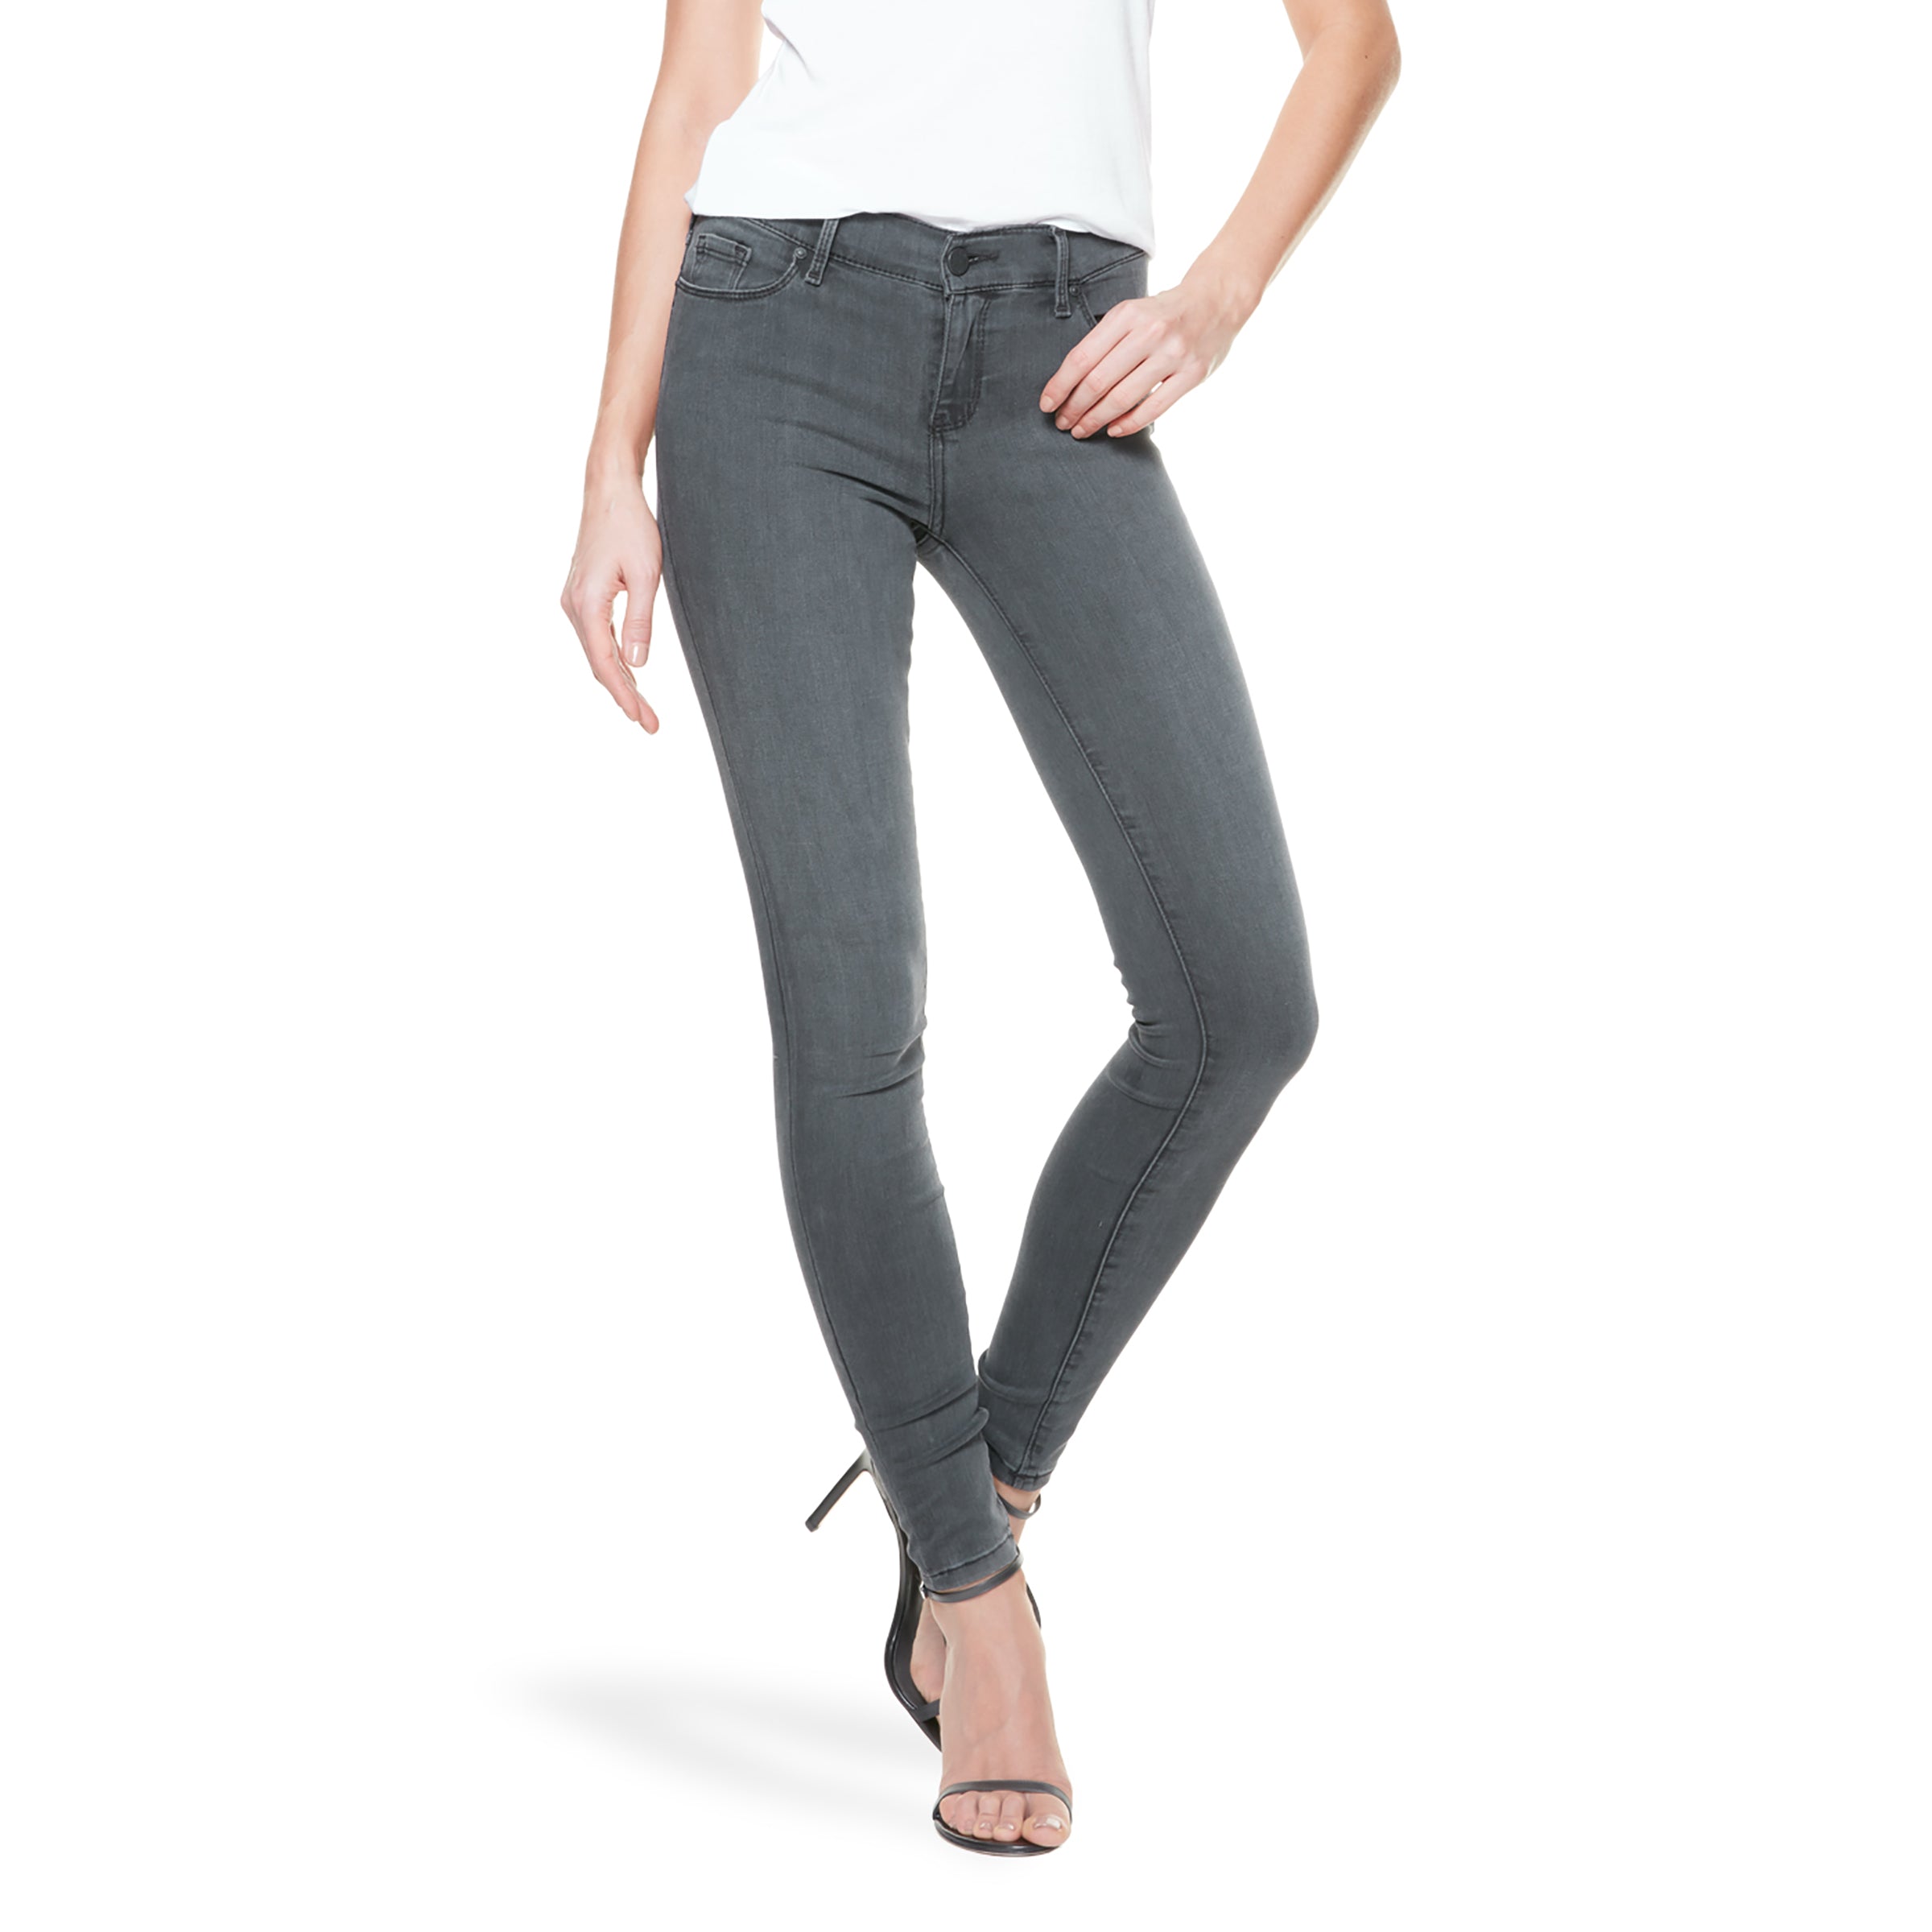 Women wearing Gris medio Mid Rise Skinny Orchard Jeans